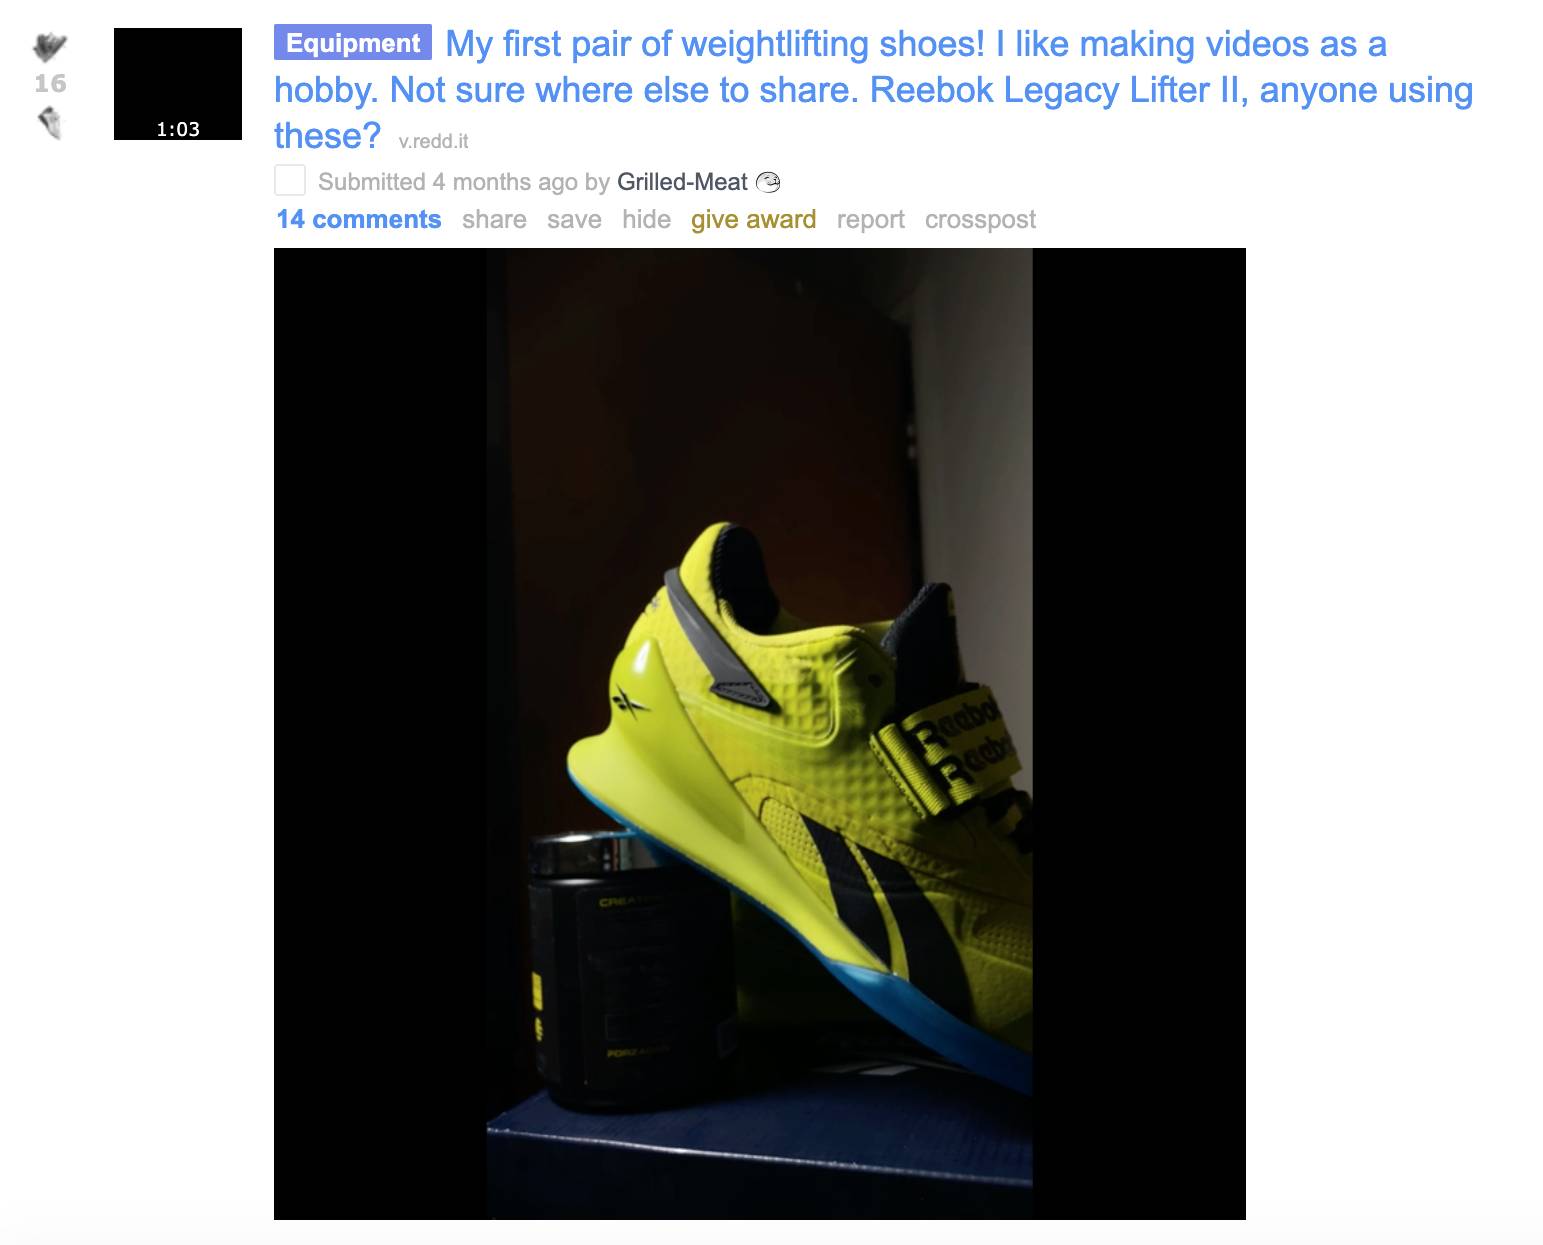 Reddit user Grilled-Meat shares a photo of neon green Reebok Lifters.